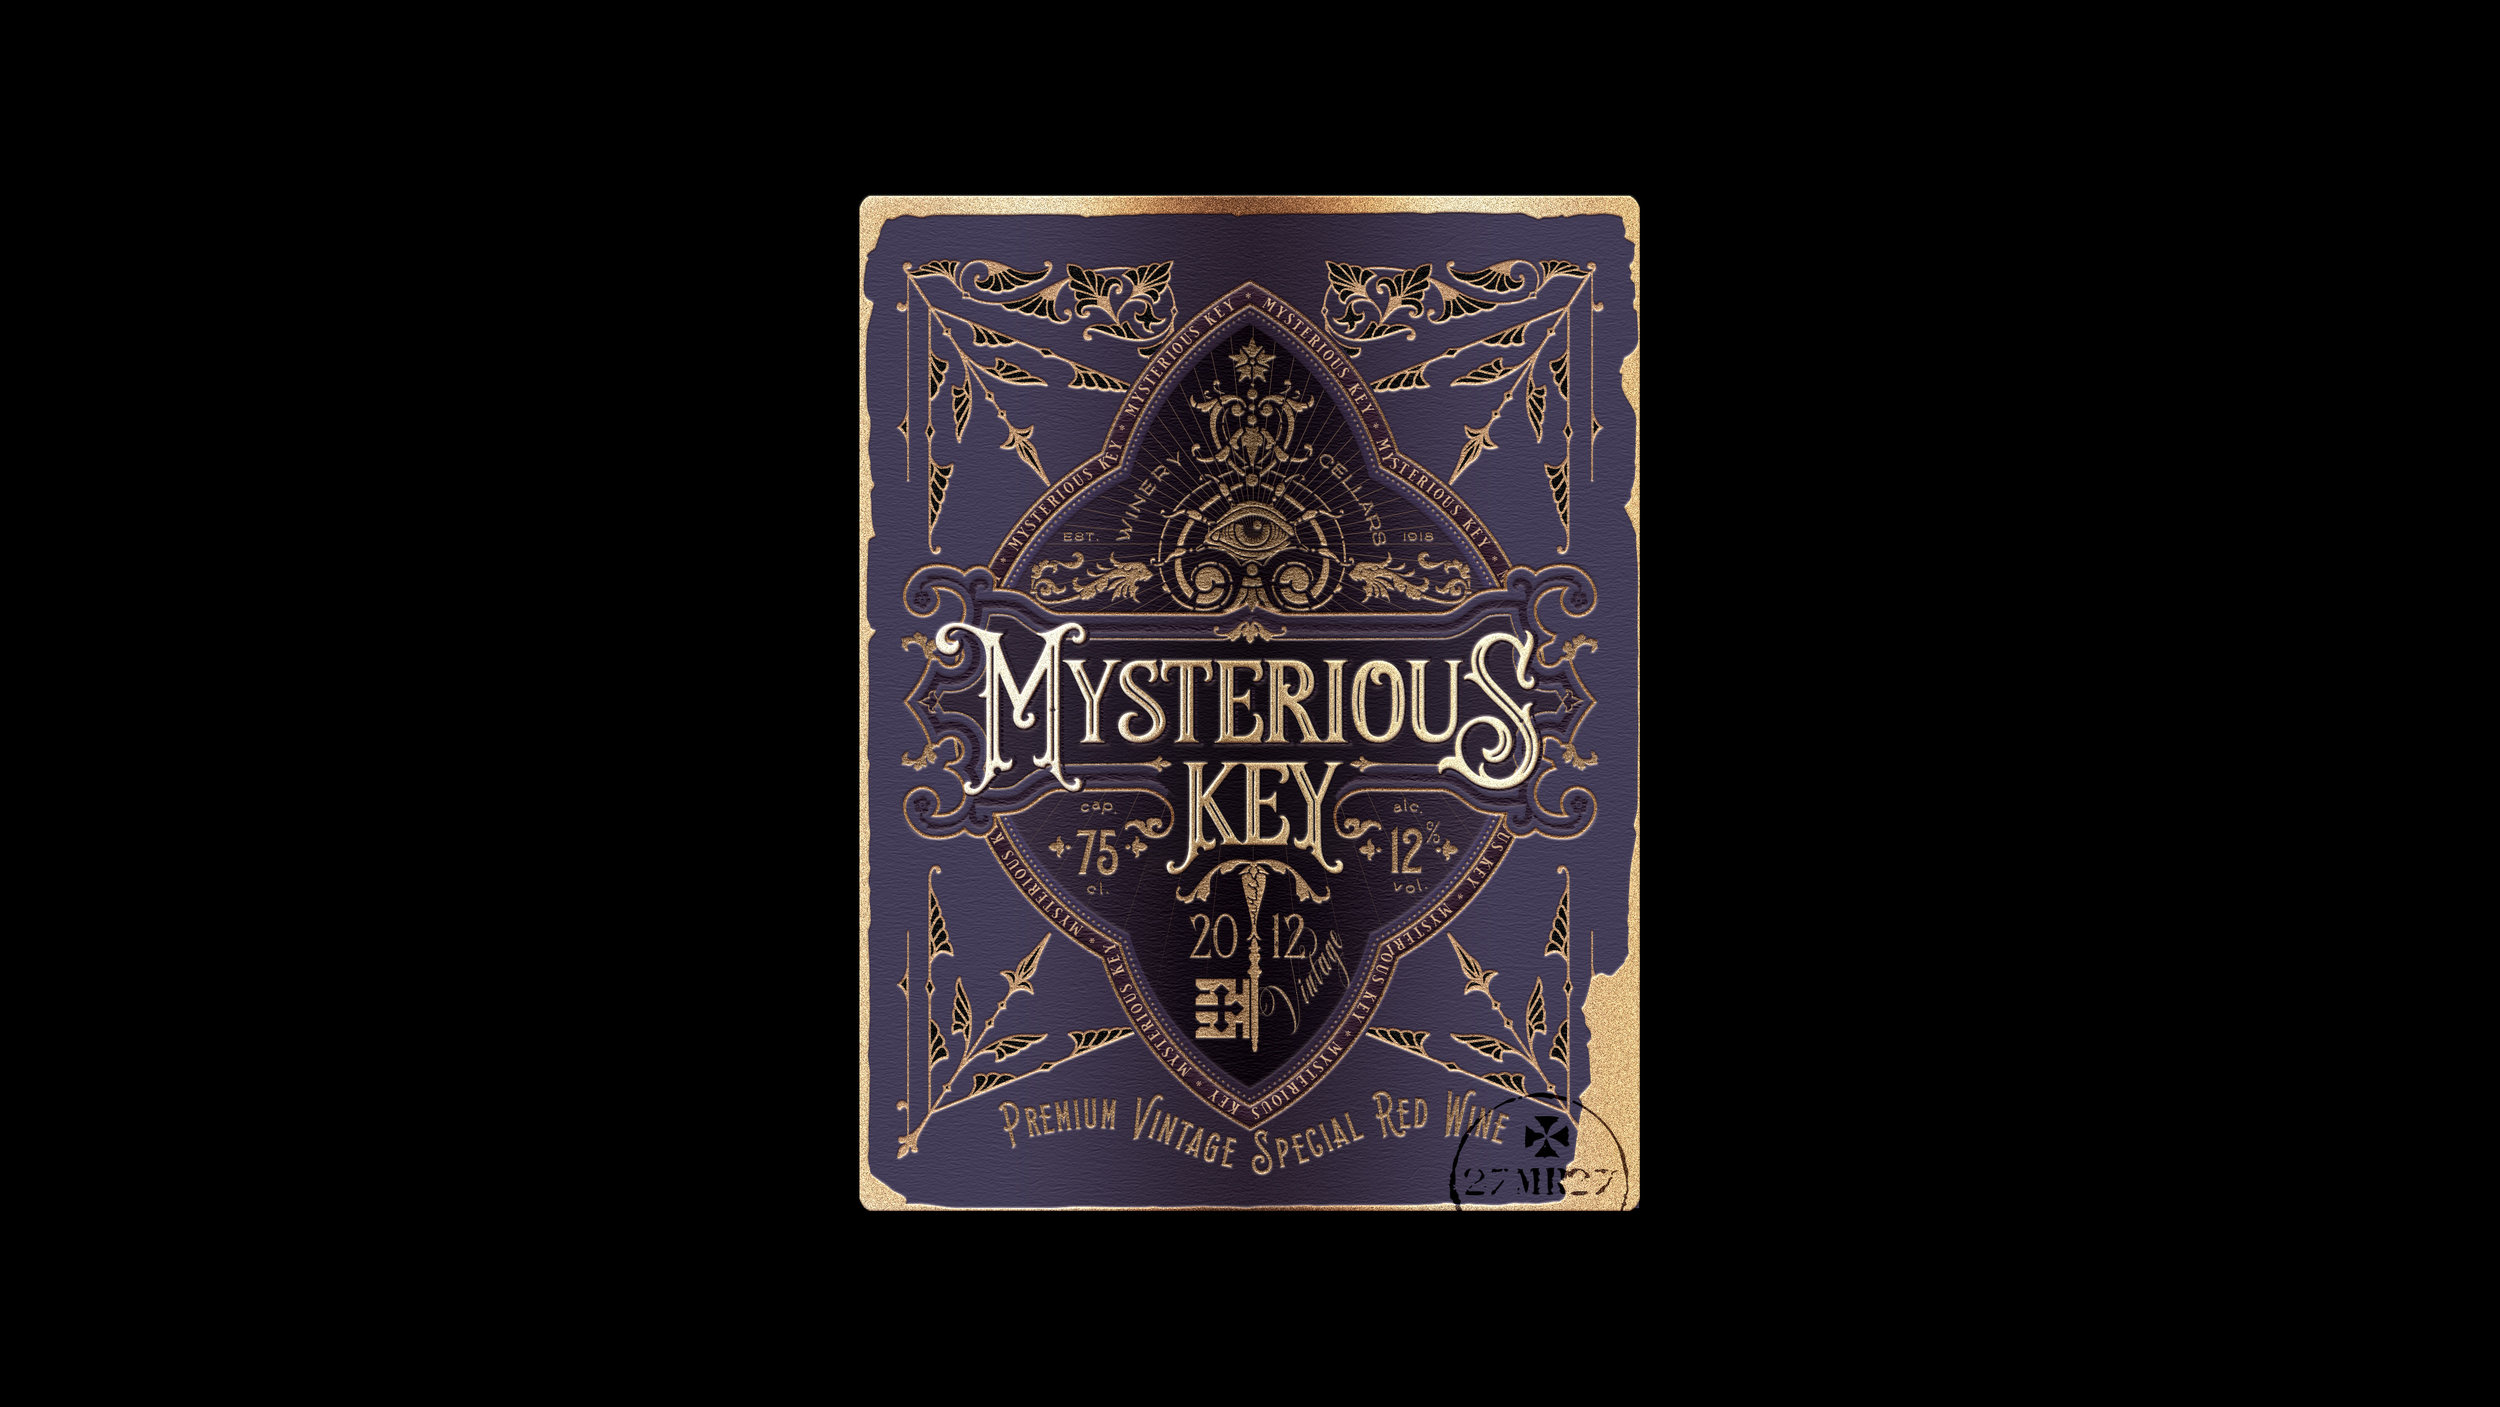 Vintage Style with a Mystic Tone for Wine label Concept